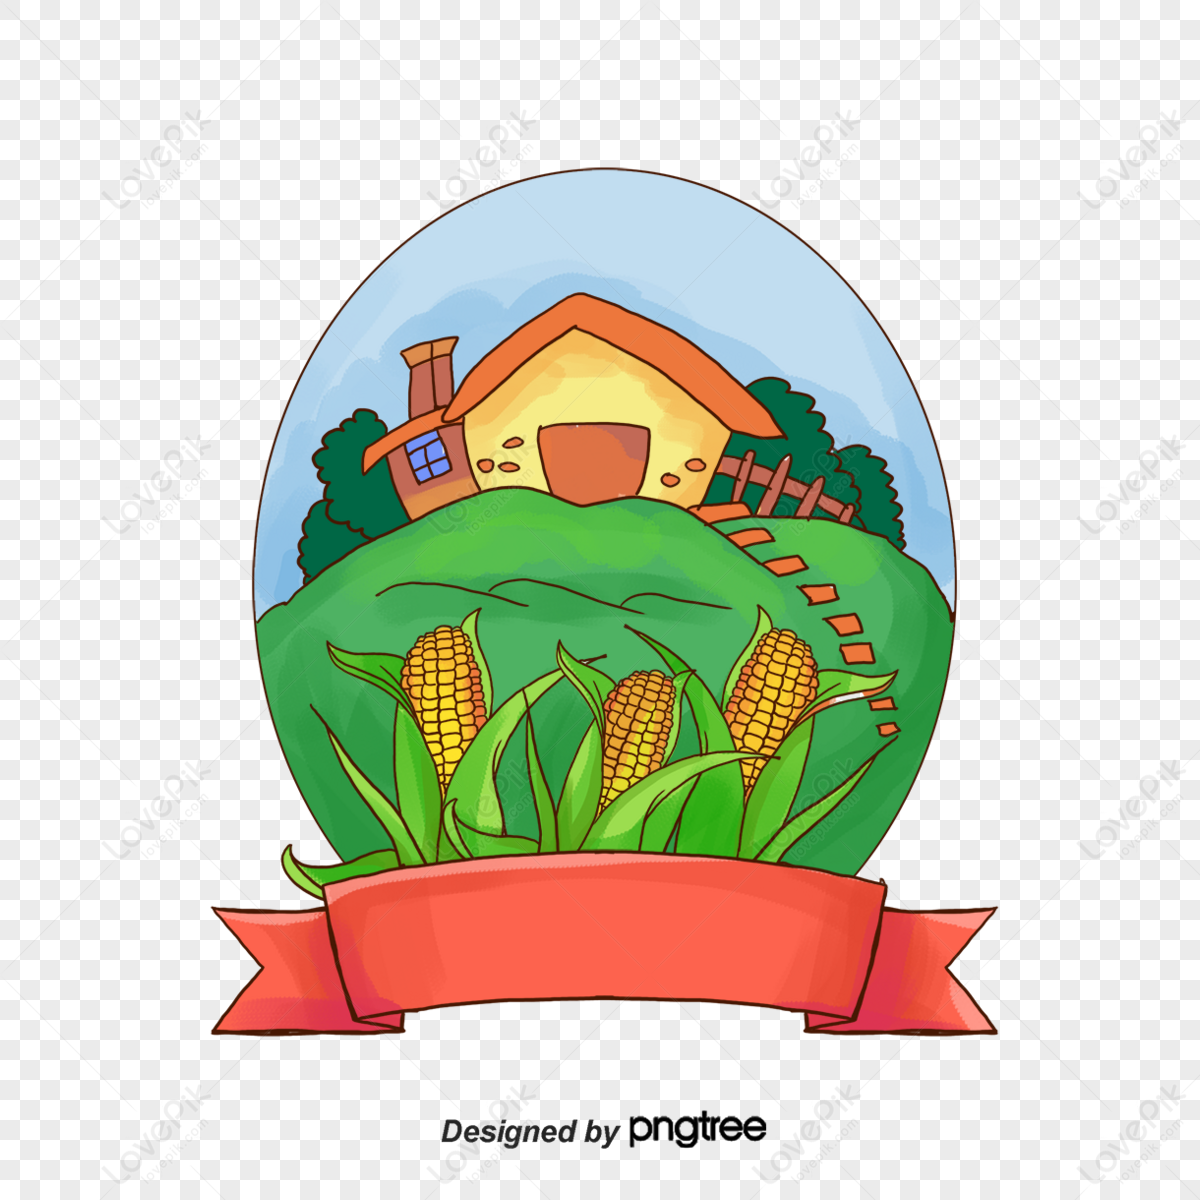 red-gold-quality-logo-png-transparent - Vegetable Growers News